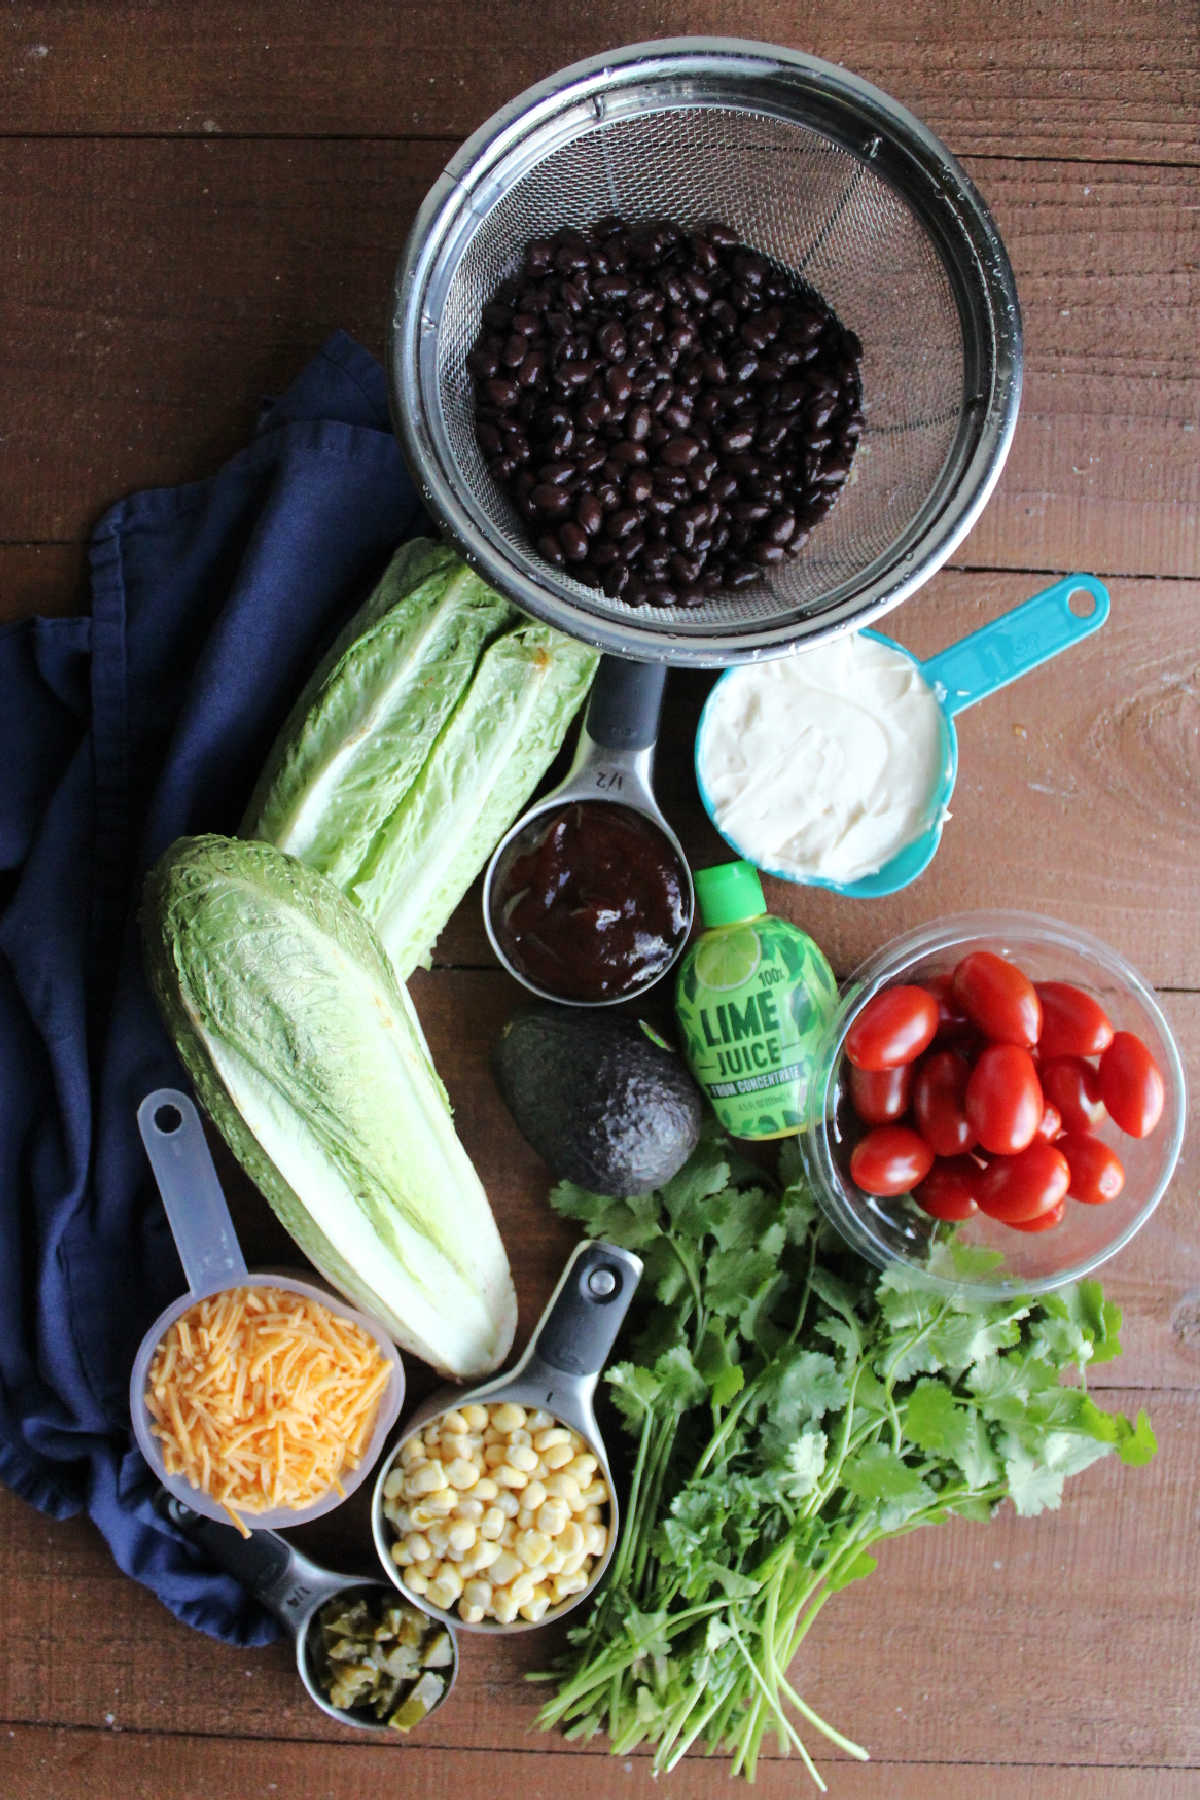 Ingredients including romaine lettuce, black beans, cherry tomatoes, cilantro, corn, cheese, jalapenos, mayonnaise, bbq sauce, and lime juice ready to be made into cowboy salad.